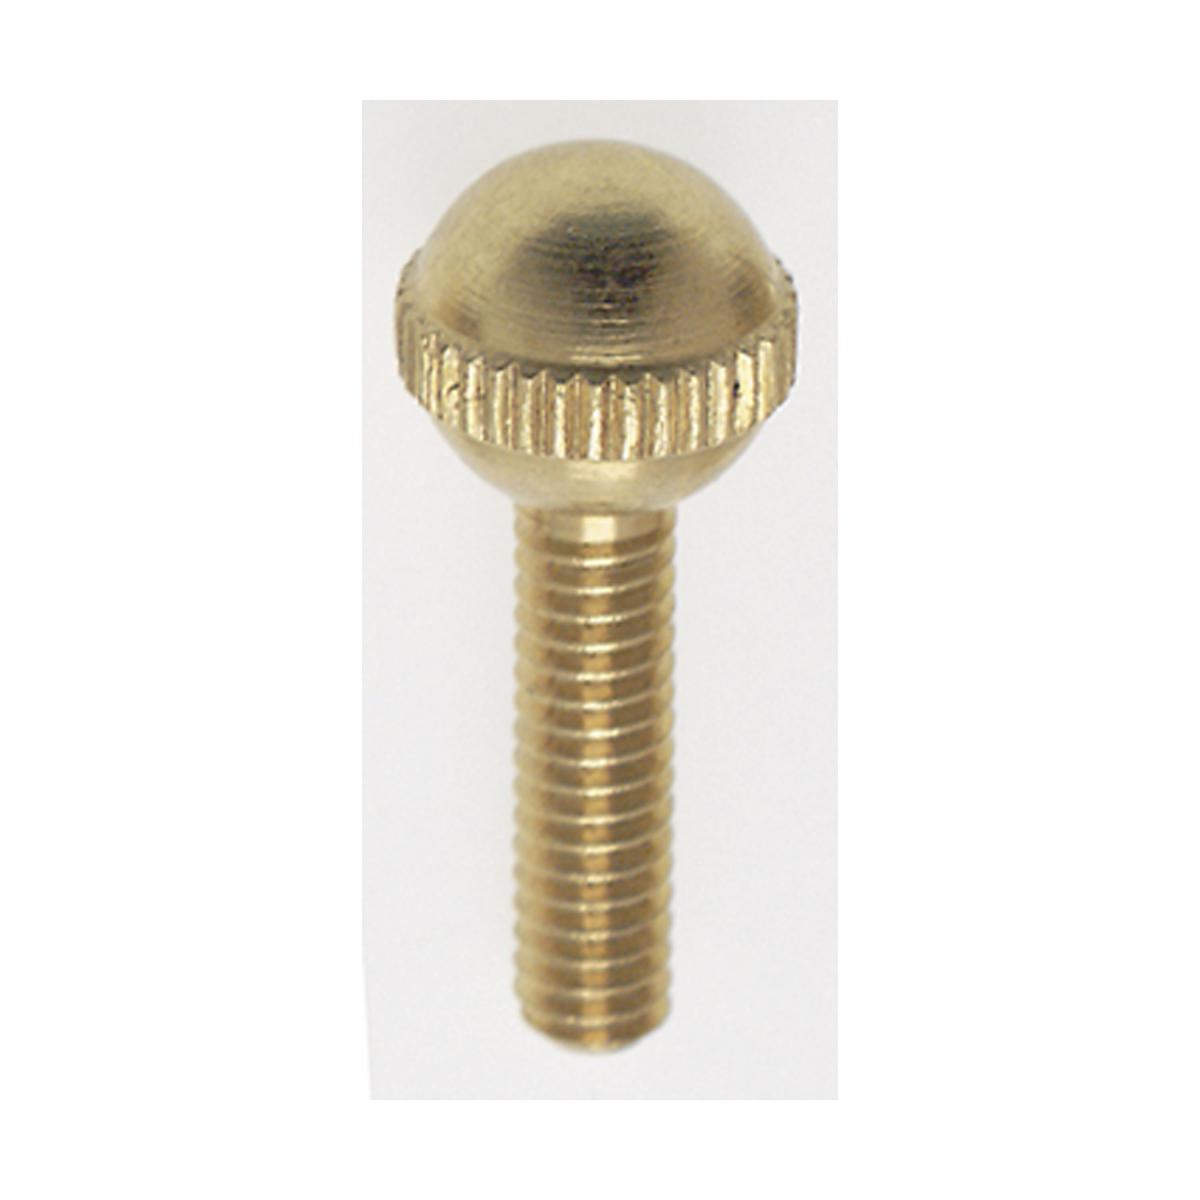 Satco 90-037 Solid Brass Thumb Screw Burnished and Lacquered 8/32 Ball Head 5/8" Length